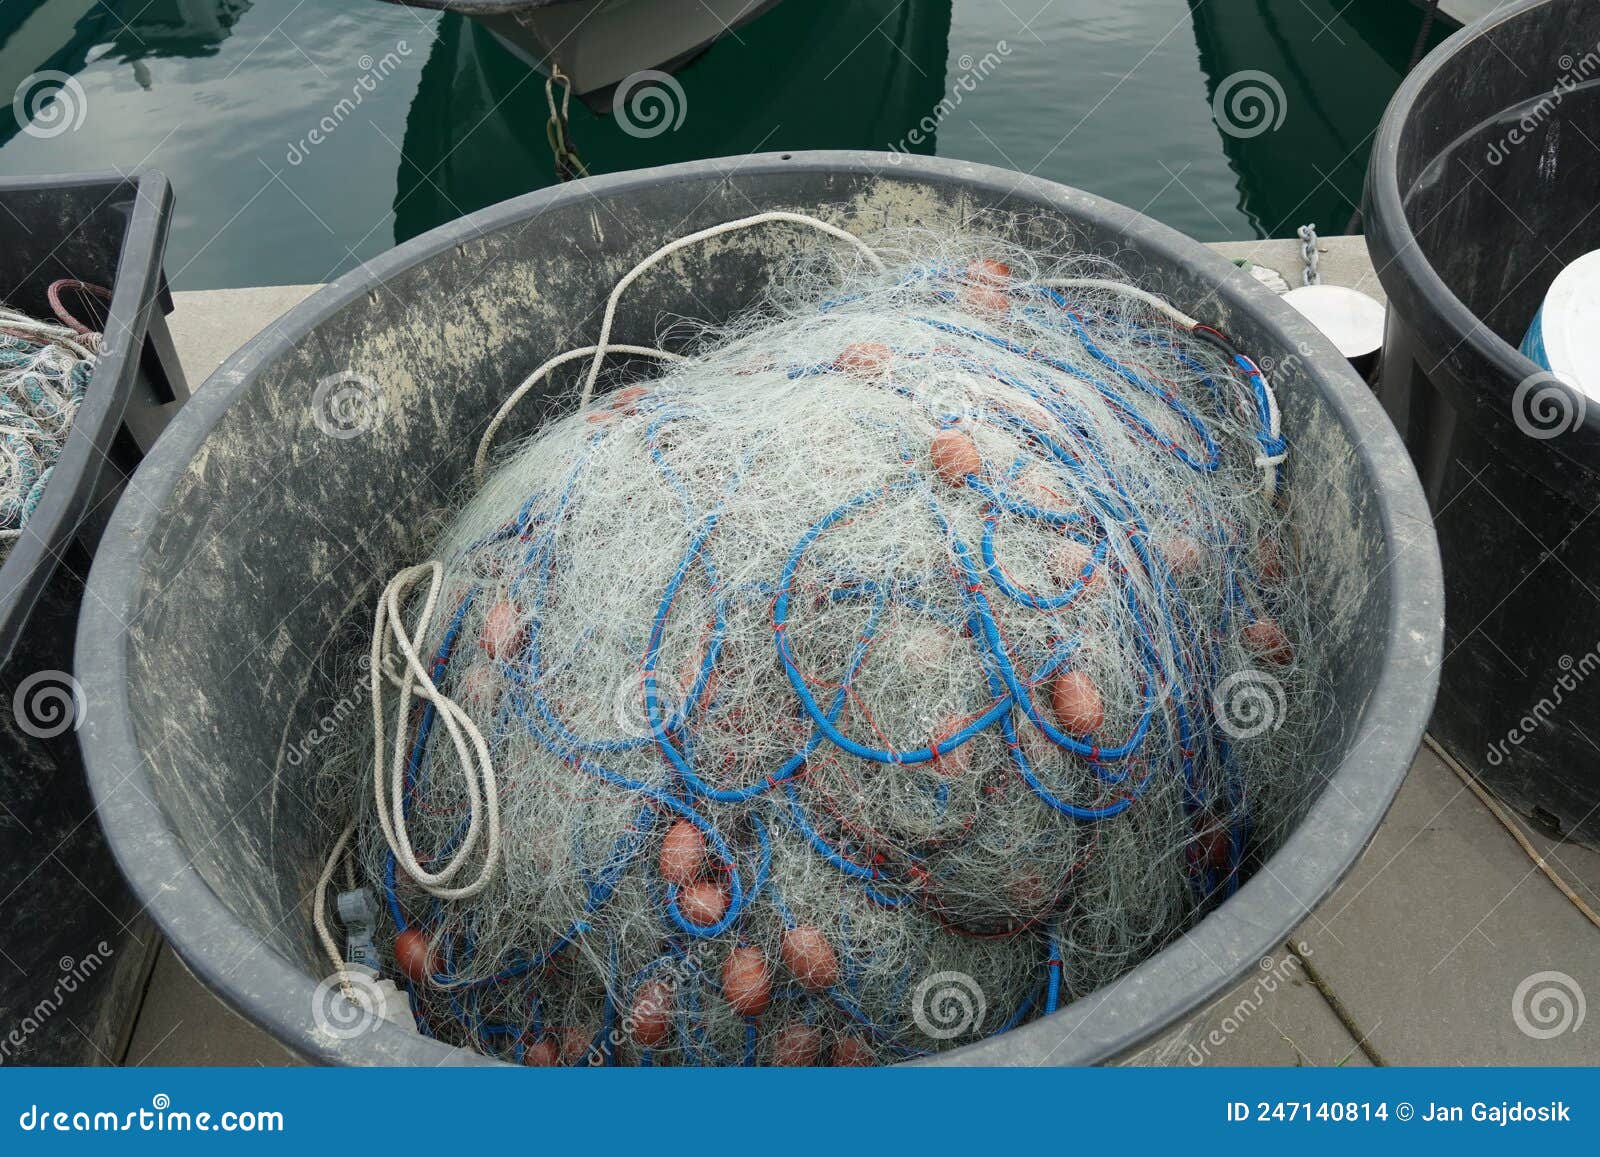 Fishing Net with Blue Ropes and Red-brown Floats Stored in Black Oval  Plastic Bucket. Stock Photo - Image of buoy, bucket: 247140814